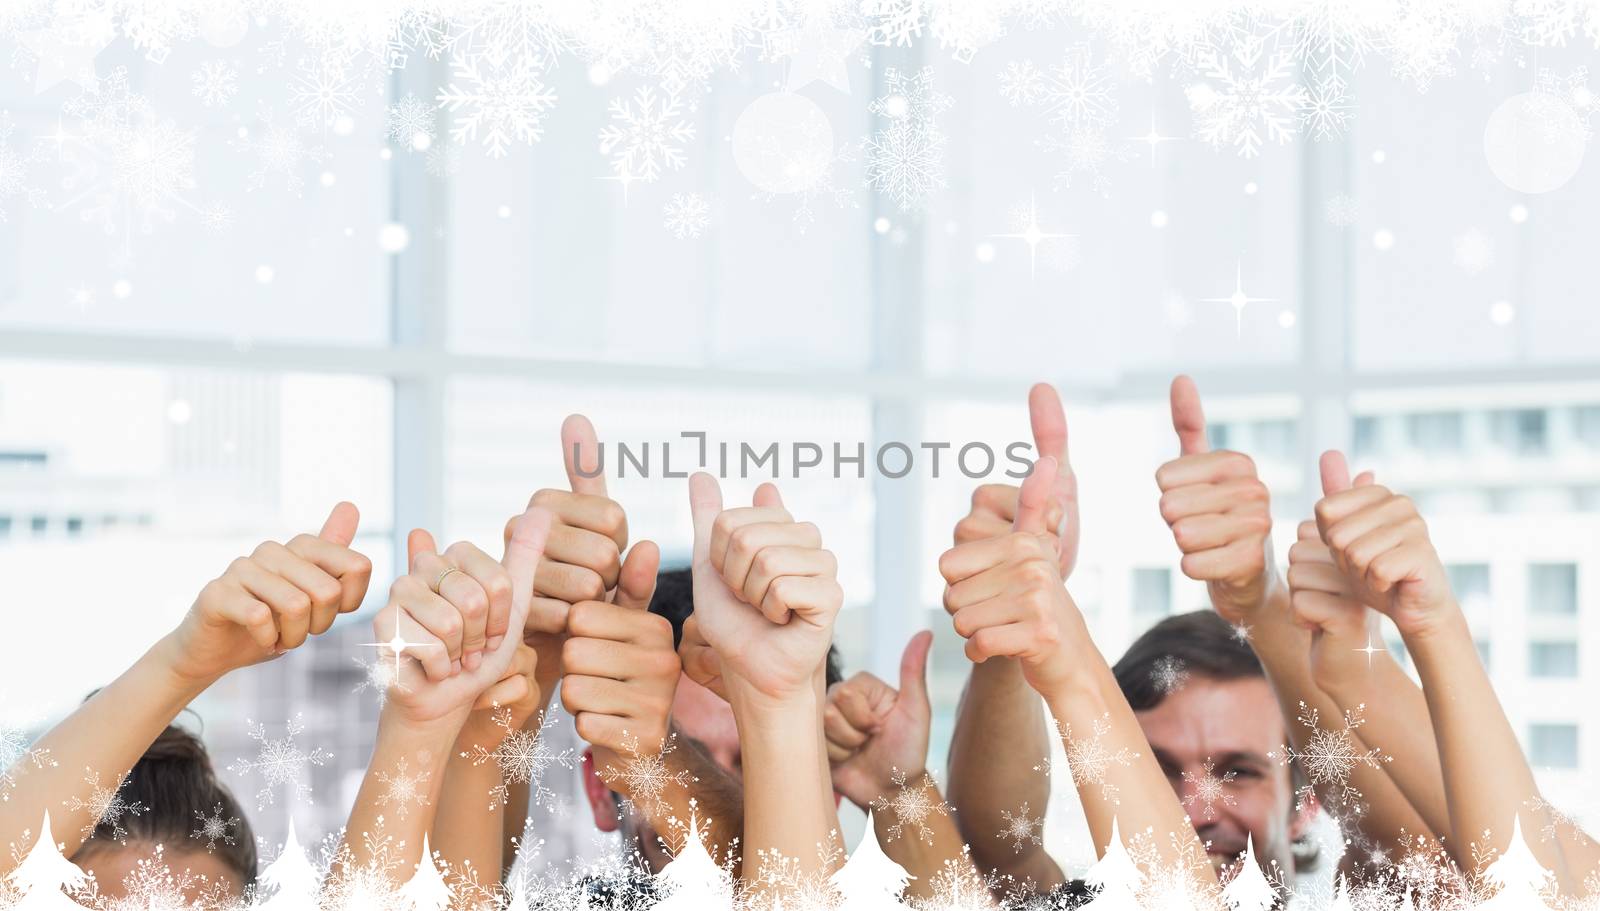 Composite image of a Closeup of cropped people gesturing thumbs up against snow falling